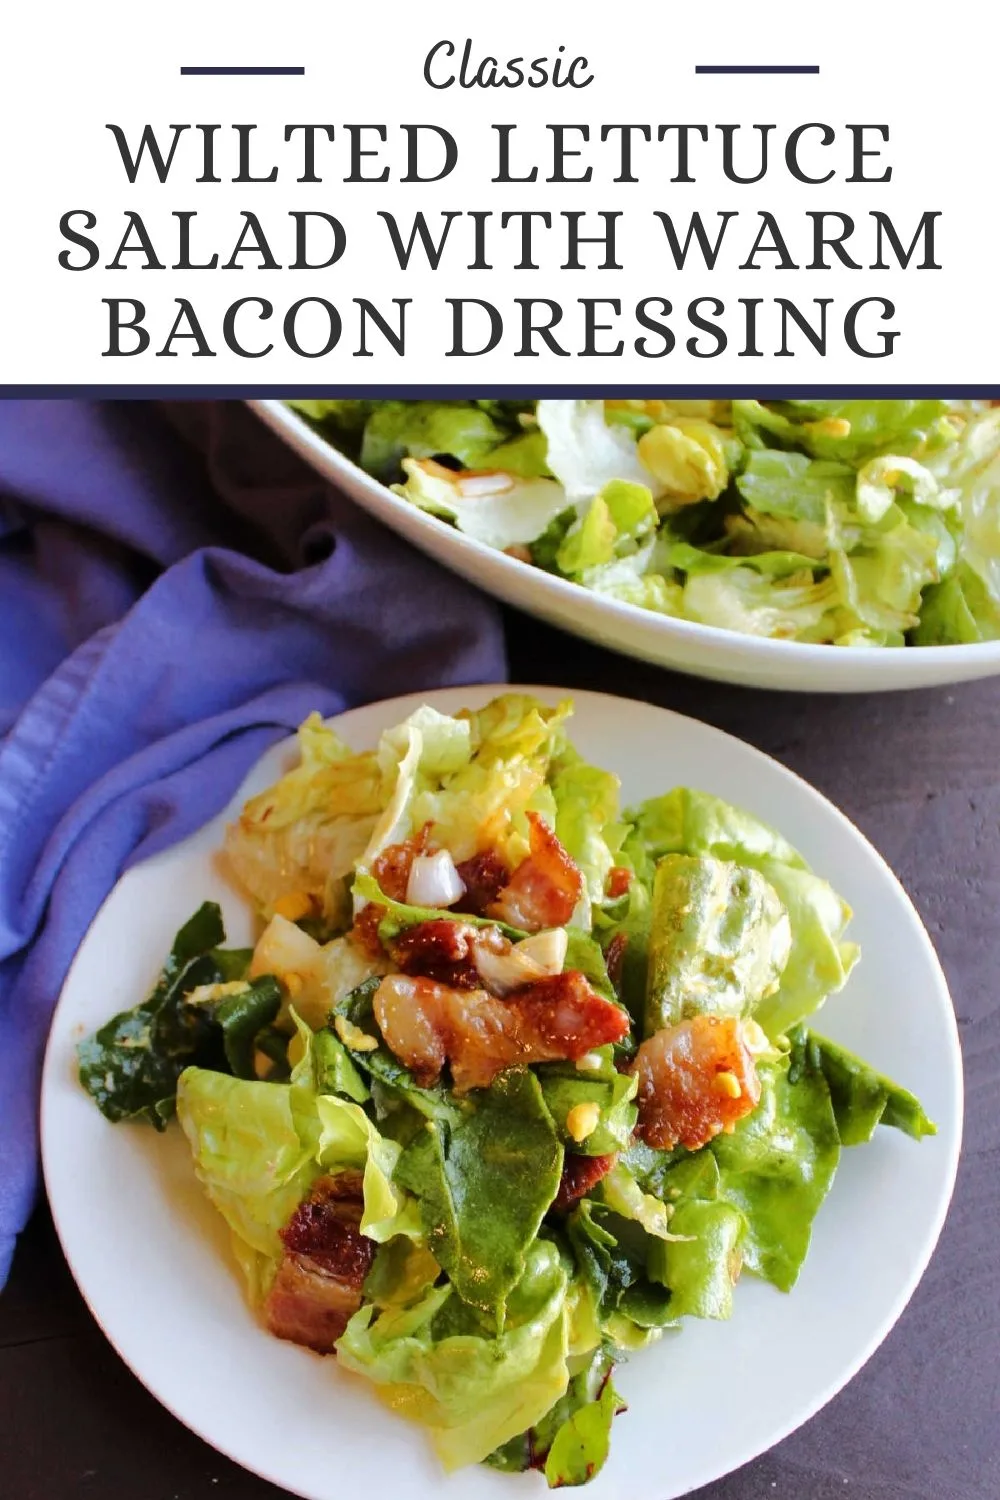  This classic recipe for wilted lettuce with bacon is the perfect way to eat leaf lettuce from the garden. The warm bacon dressing is a little sweet, tangy and savory all at once. It’s the perfect mix.